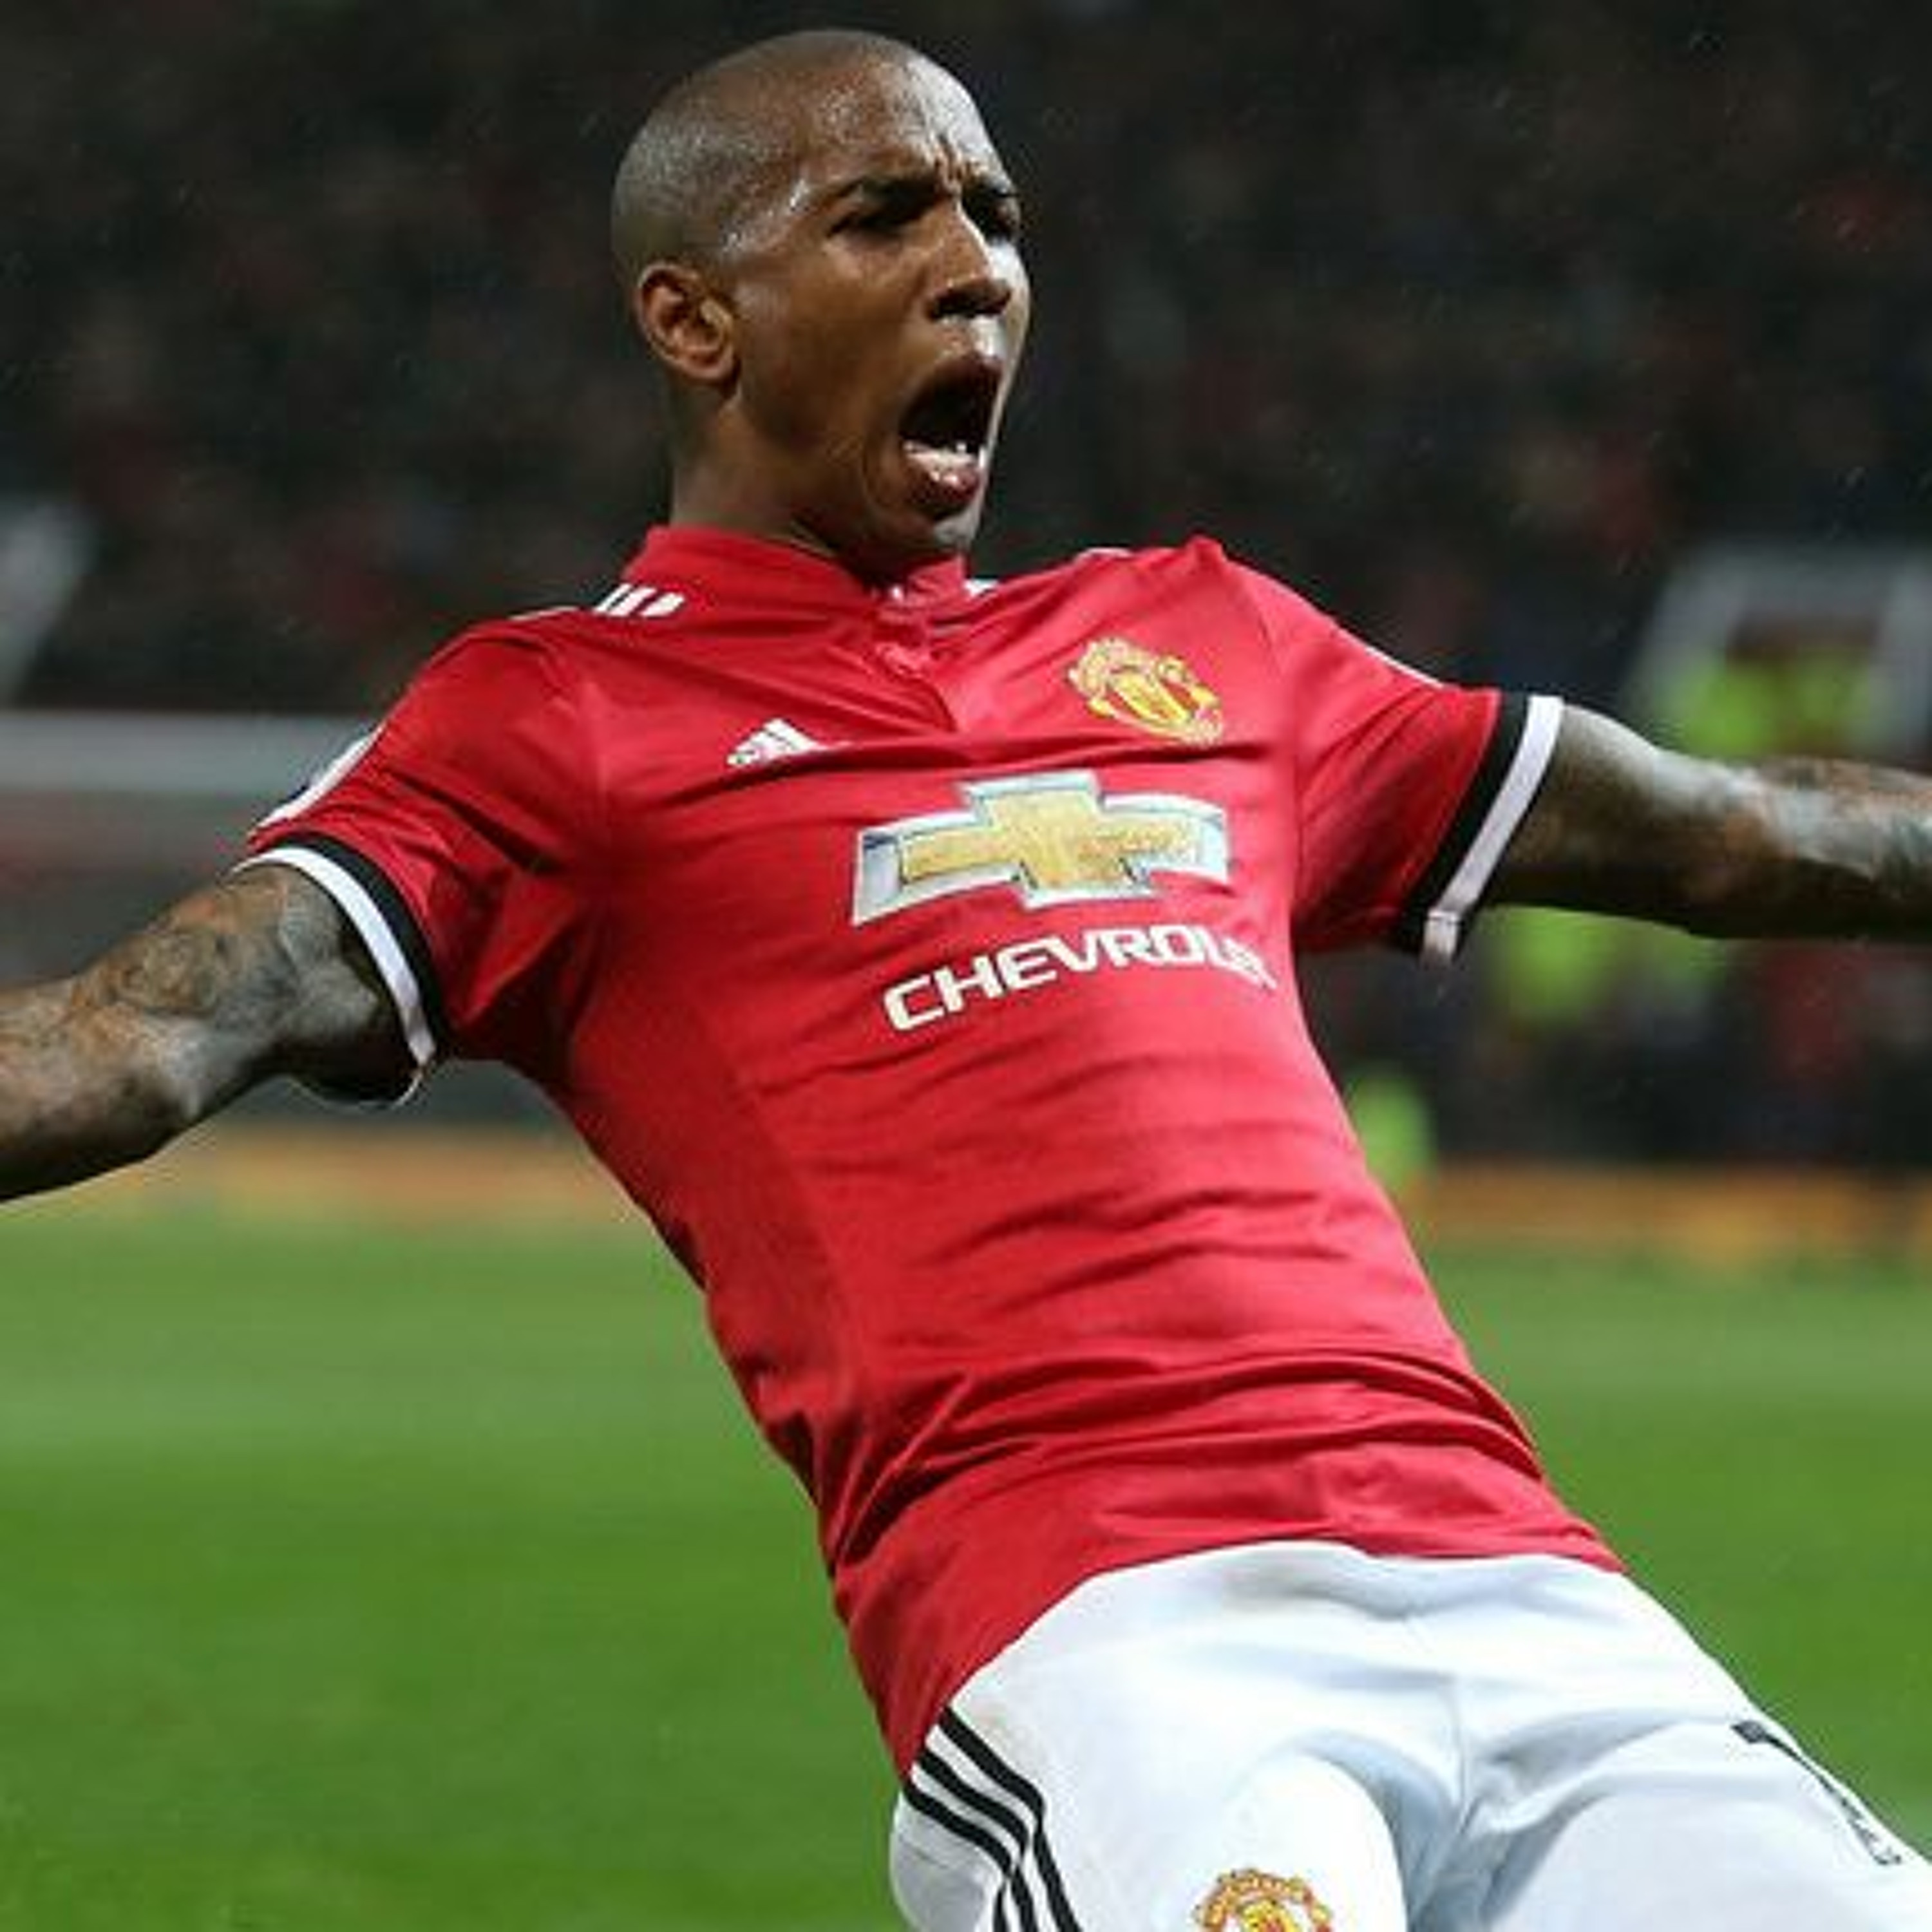 Episode 84 - Ashley Young's on fire, most defences are surprised